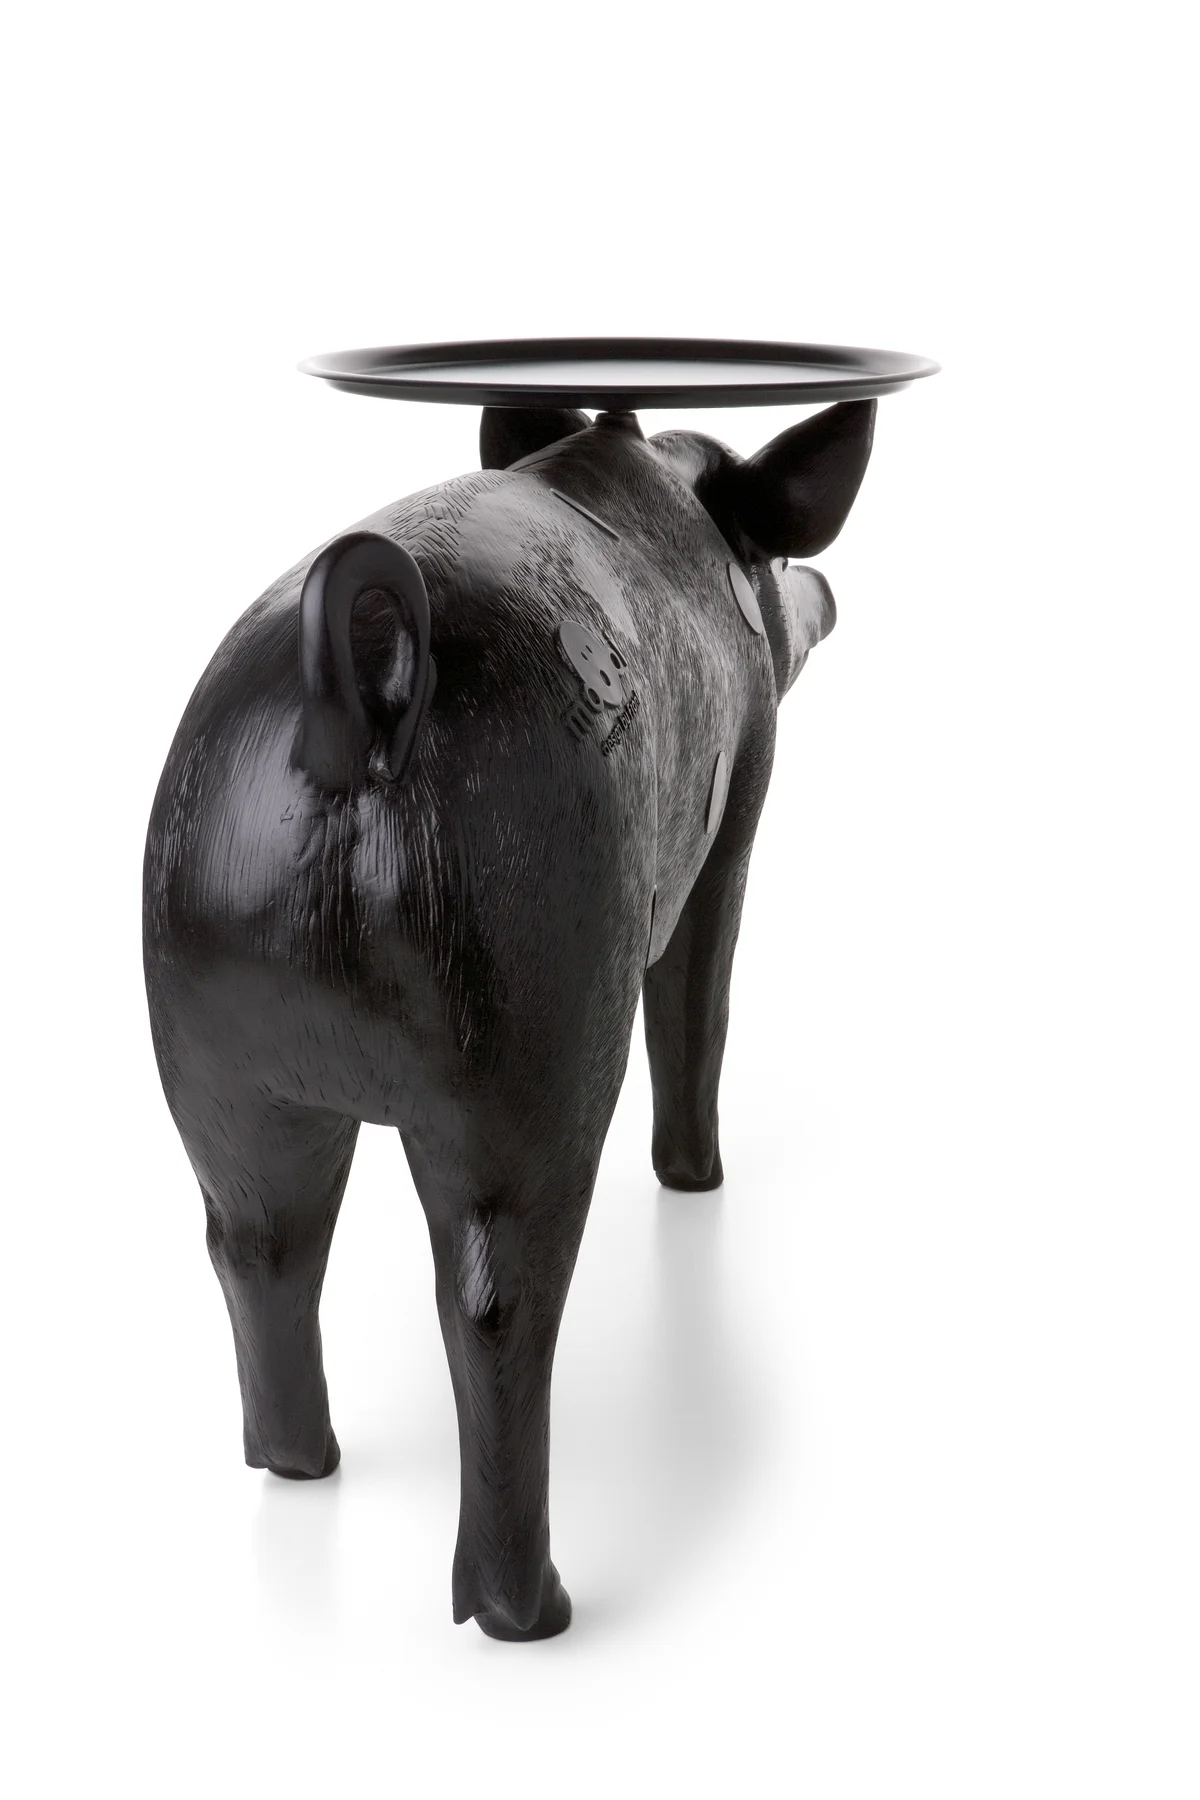 Pig table back view 